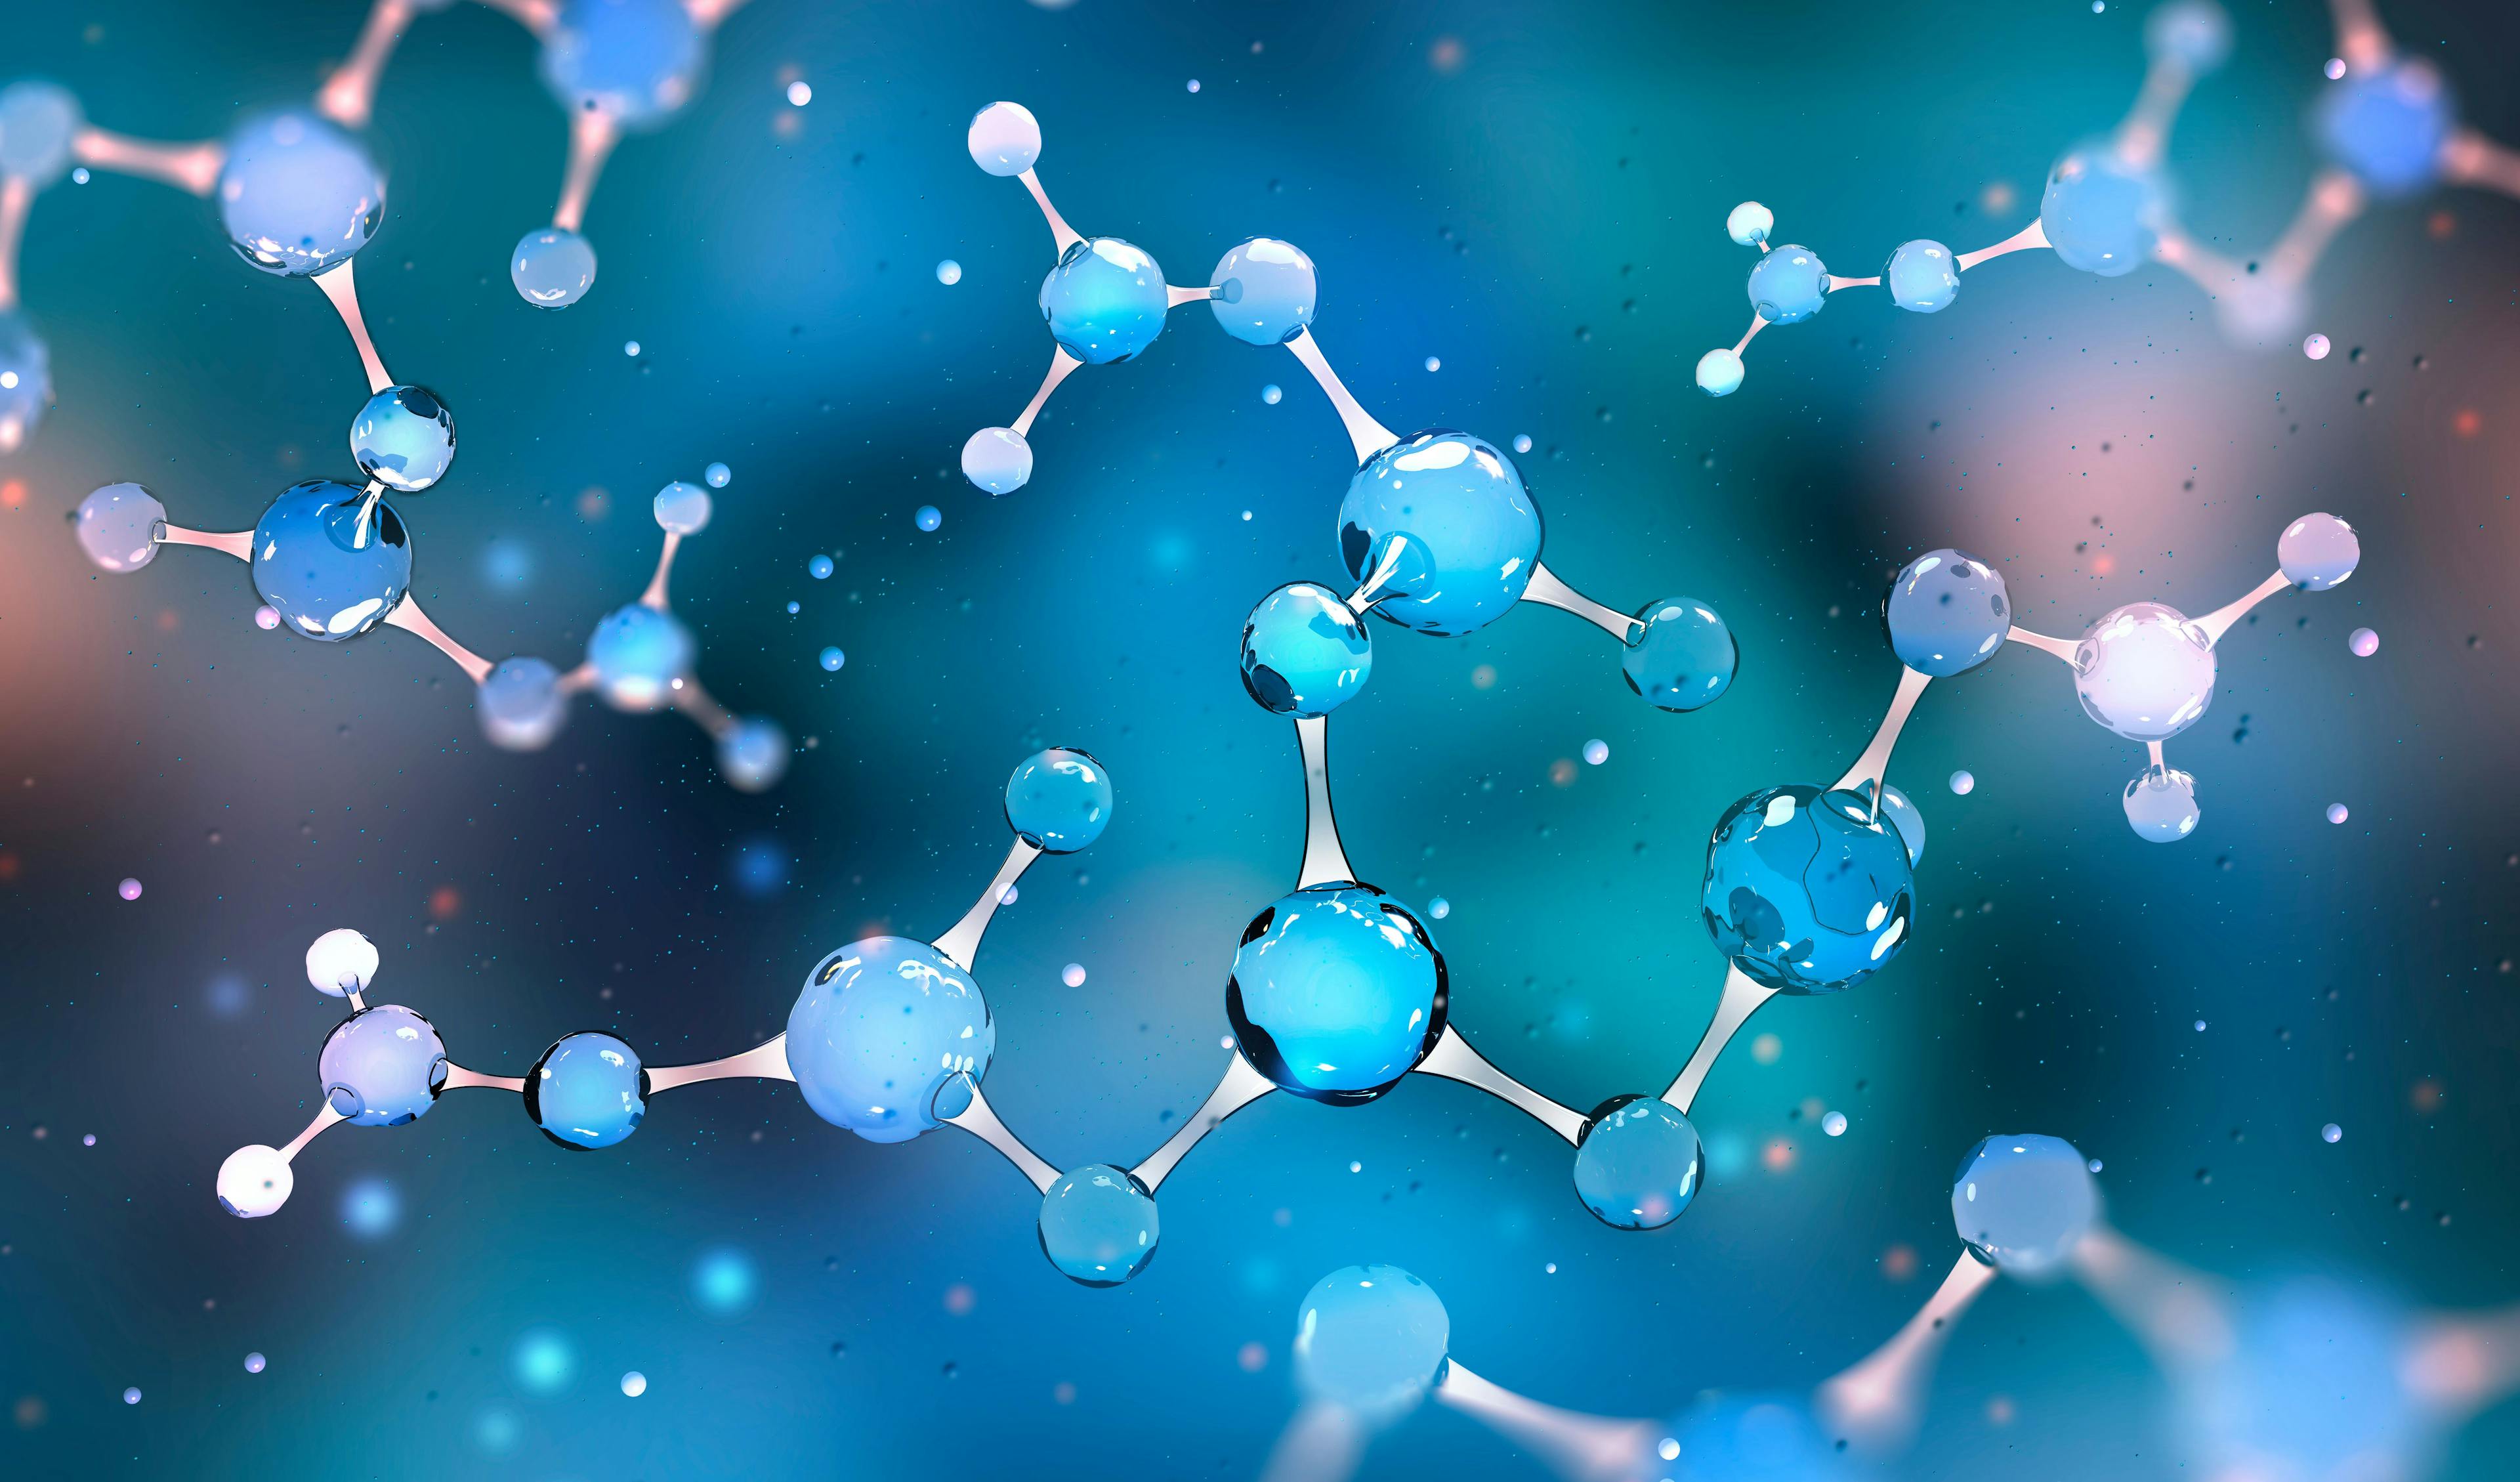 Molecule 3D illustration. Scientific breakthrough in the field of molecular synthesis. Nanotechnology in medical research of biochemical processes | Image Credit: © Siarhei - stock.adobe.com